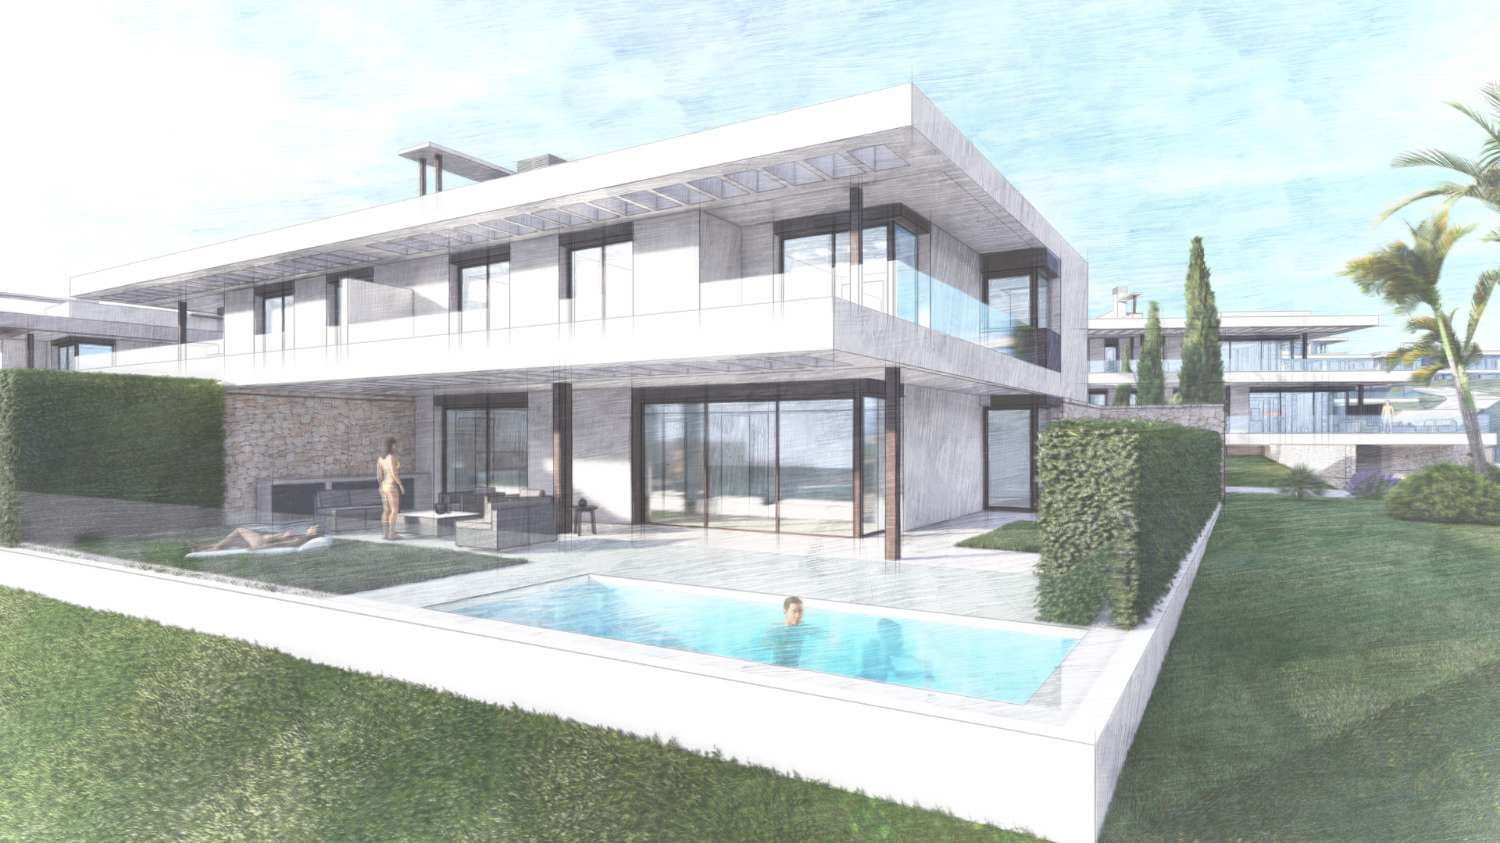 Exclusive villa in Marbella with 4 bedrooms in urbanization with security.